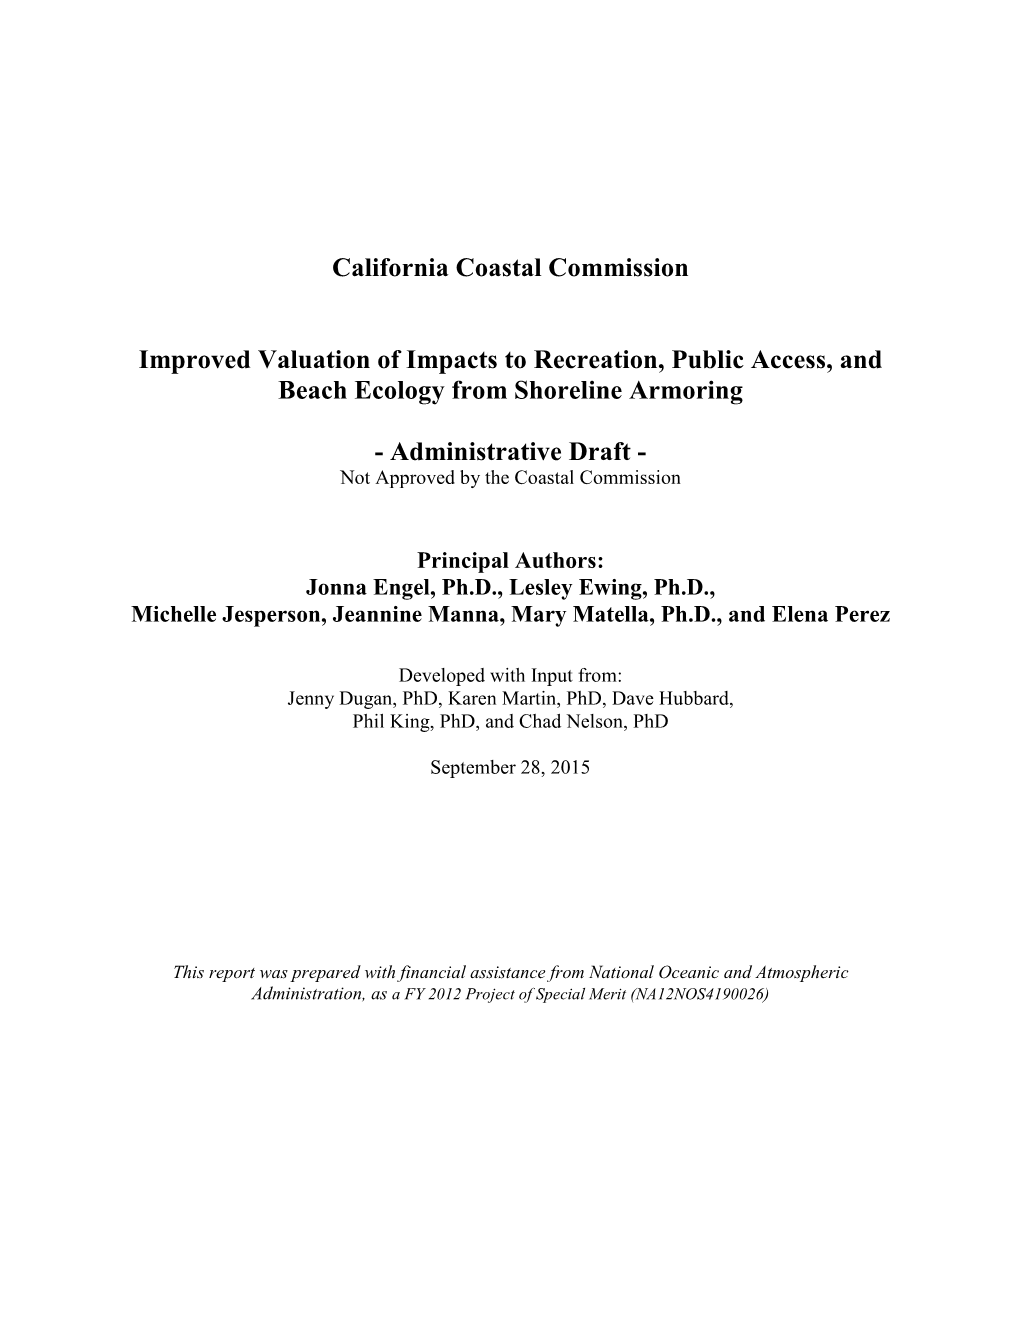 California Coastal Commission Improved Valuation of Impacts To